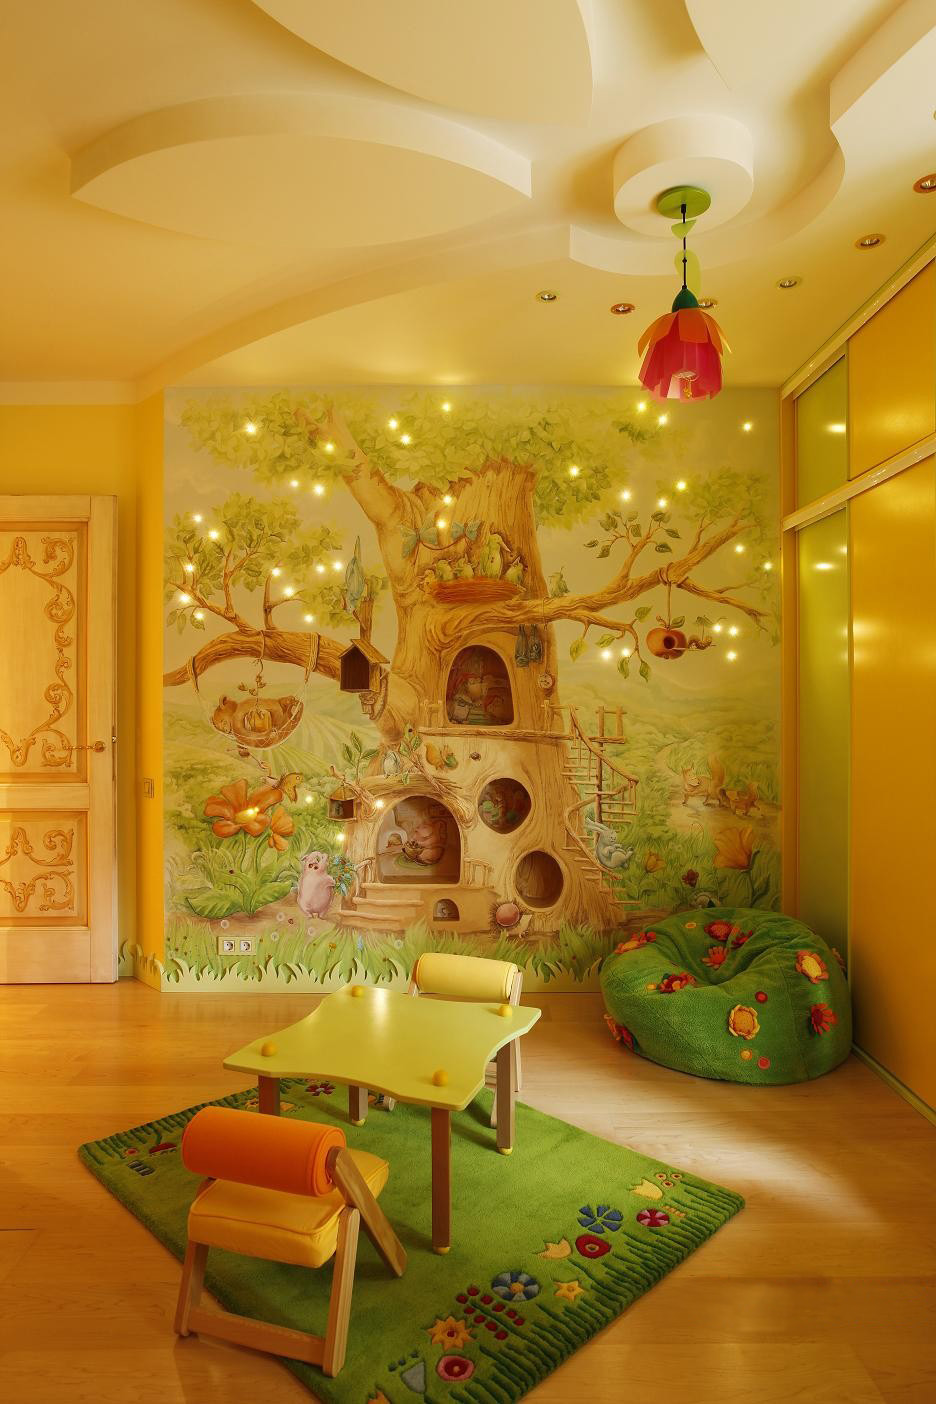 stunning-tree-wallpapers-for-childrens-room-decoration-with-floral-lighting-in-ceiling-as-well-small-table-and-chair-on-green-rug-as-well-wooden-laminate-floor